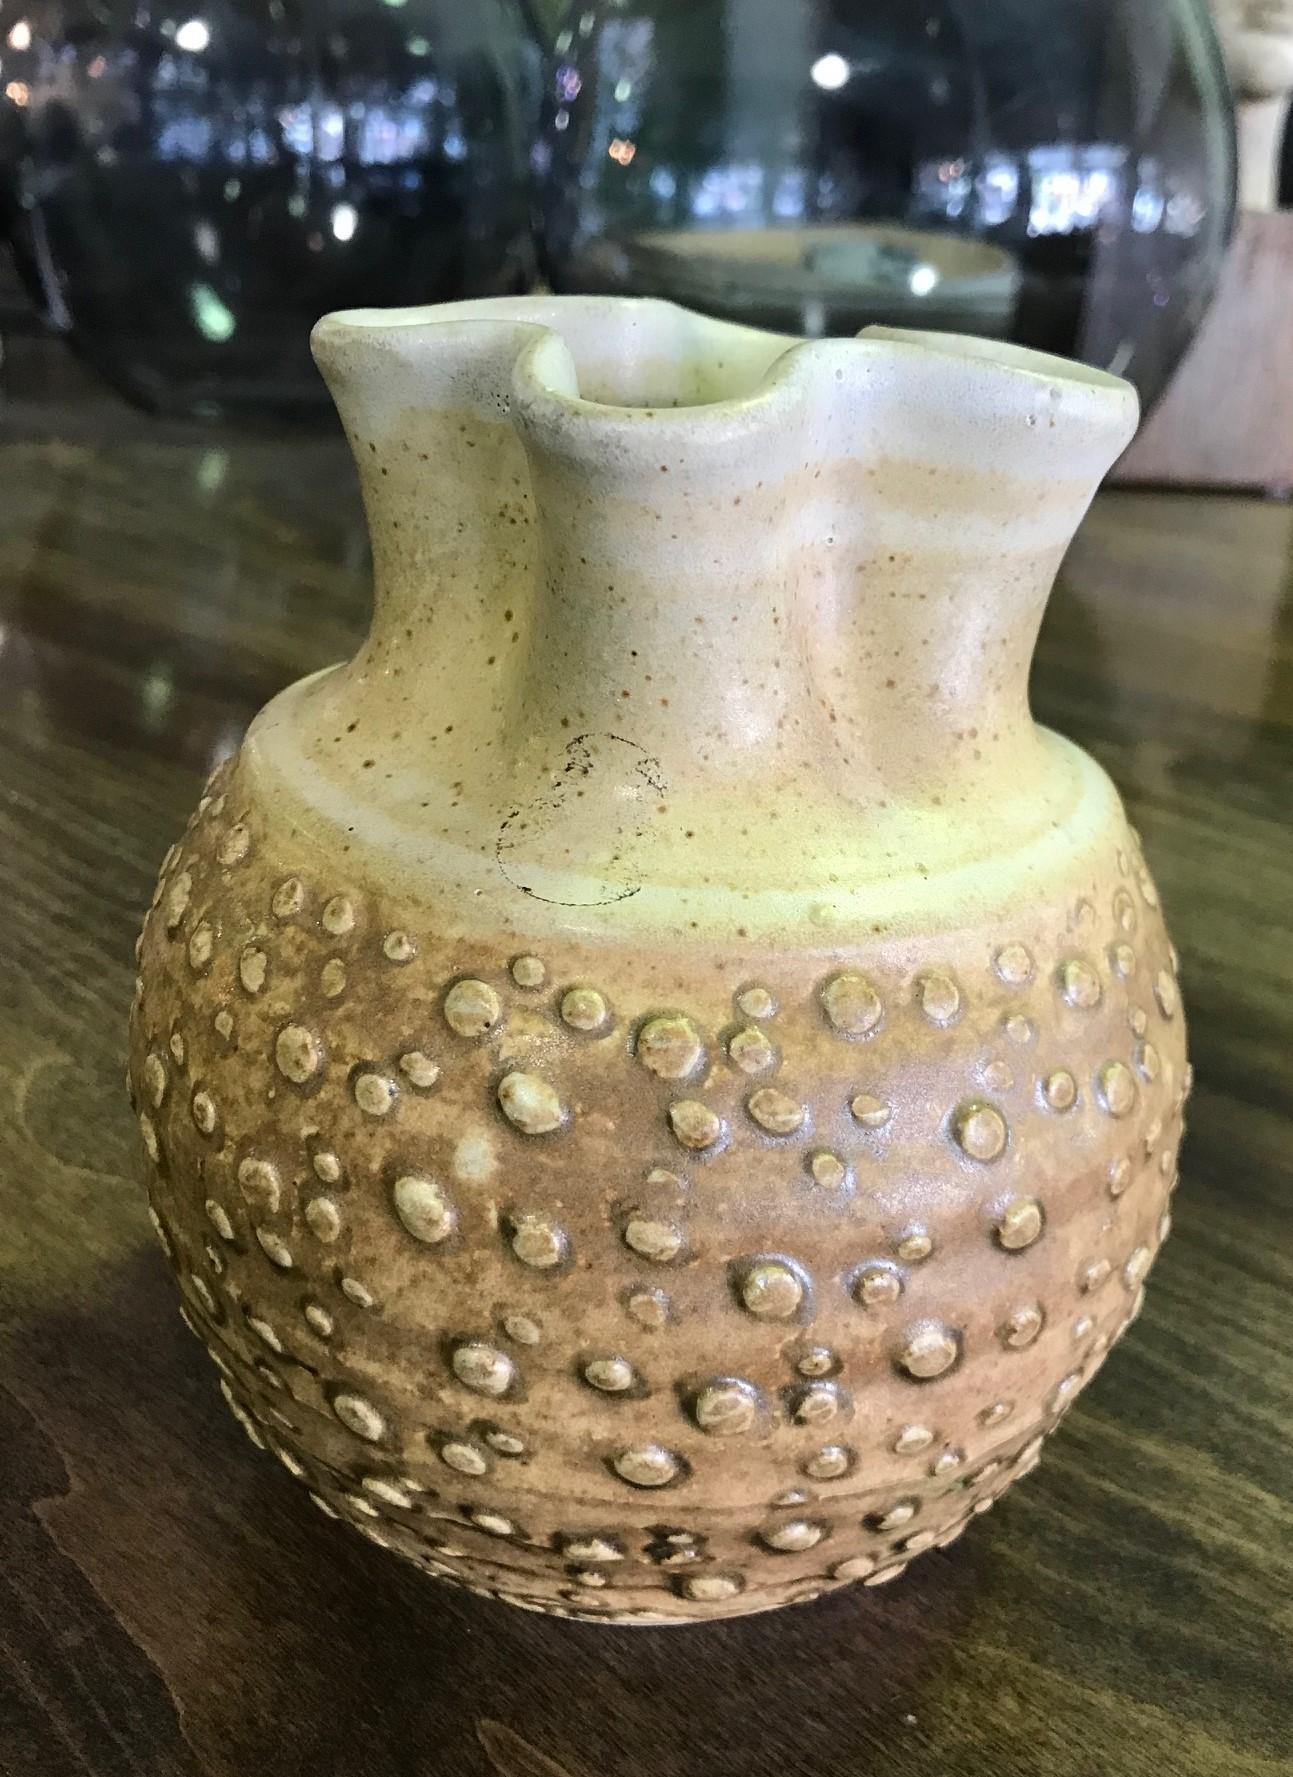 A wonderfully textured and designed, midcentury pottery vase by renowned master potter F. Carlton Ball.

Ball, who studied with Glen Lukens, taught at University of Southern California between 1956-1967 and later at University of Puget Sound,